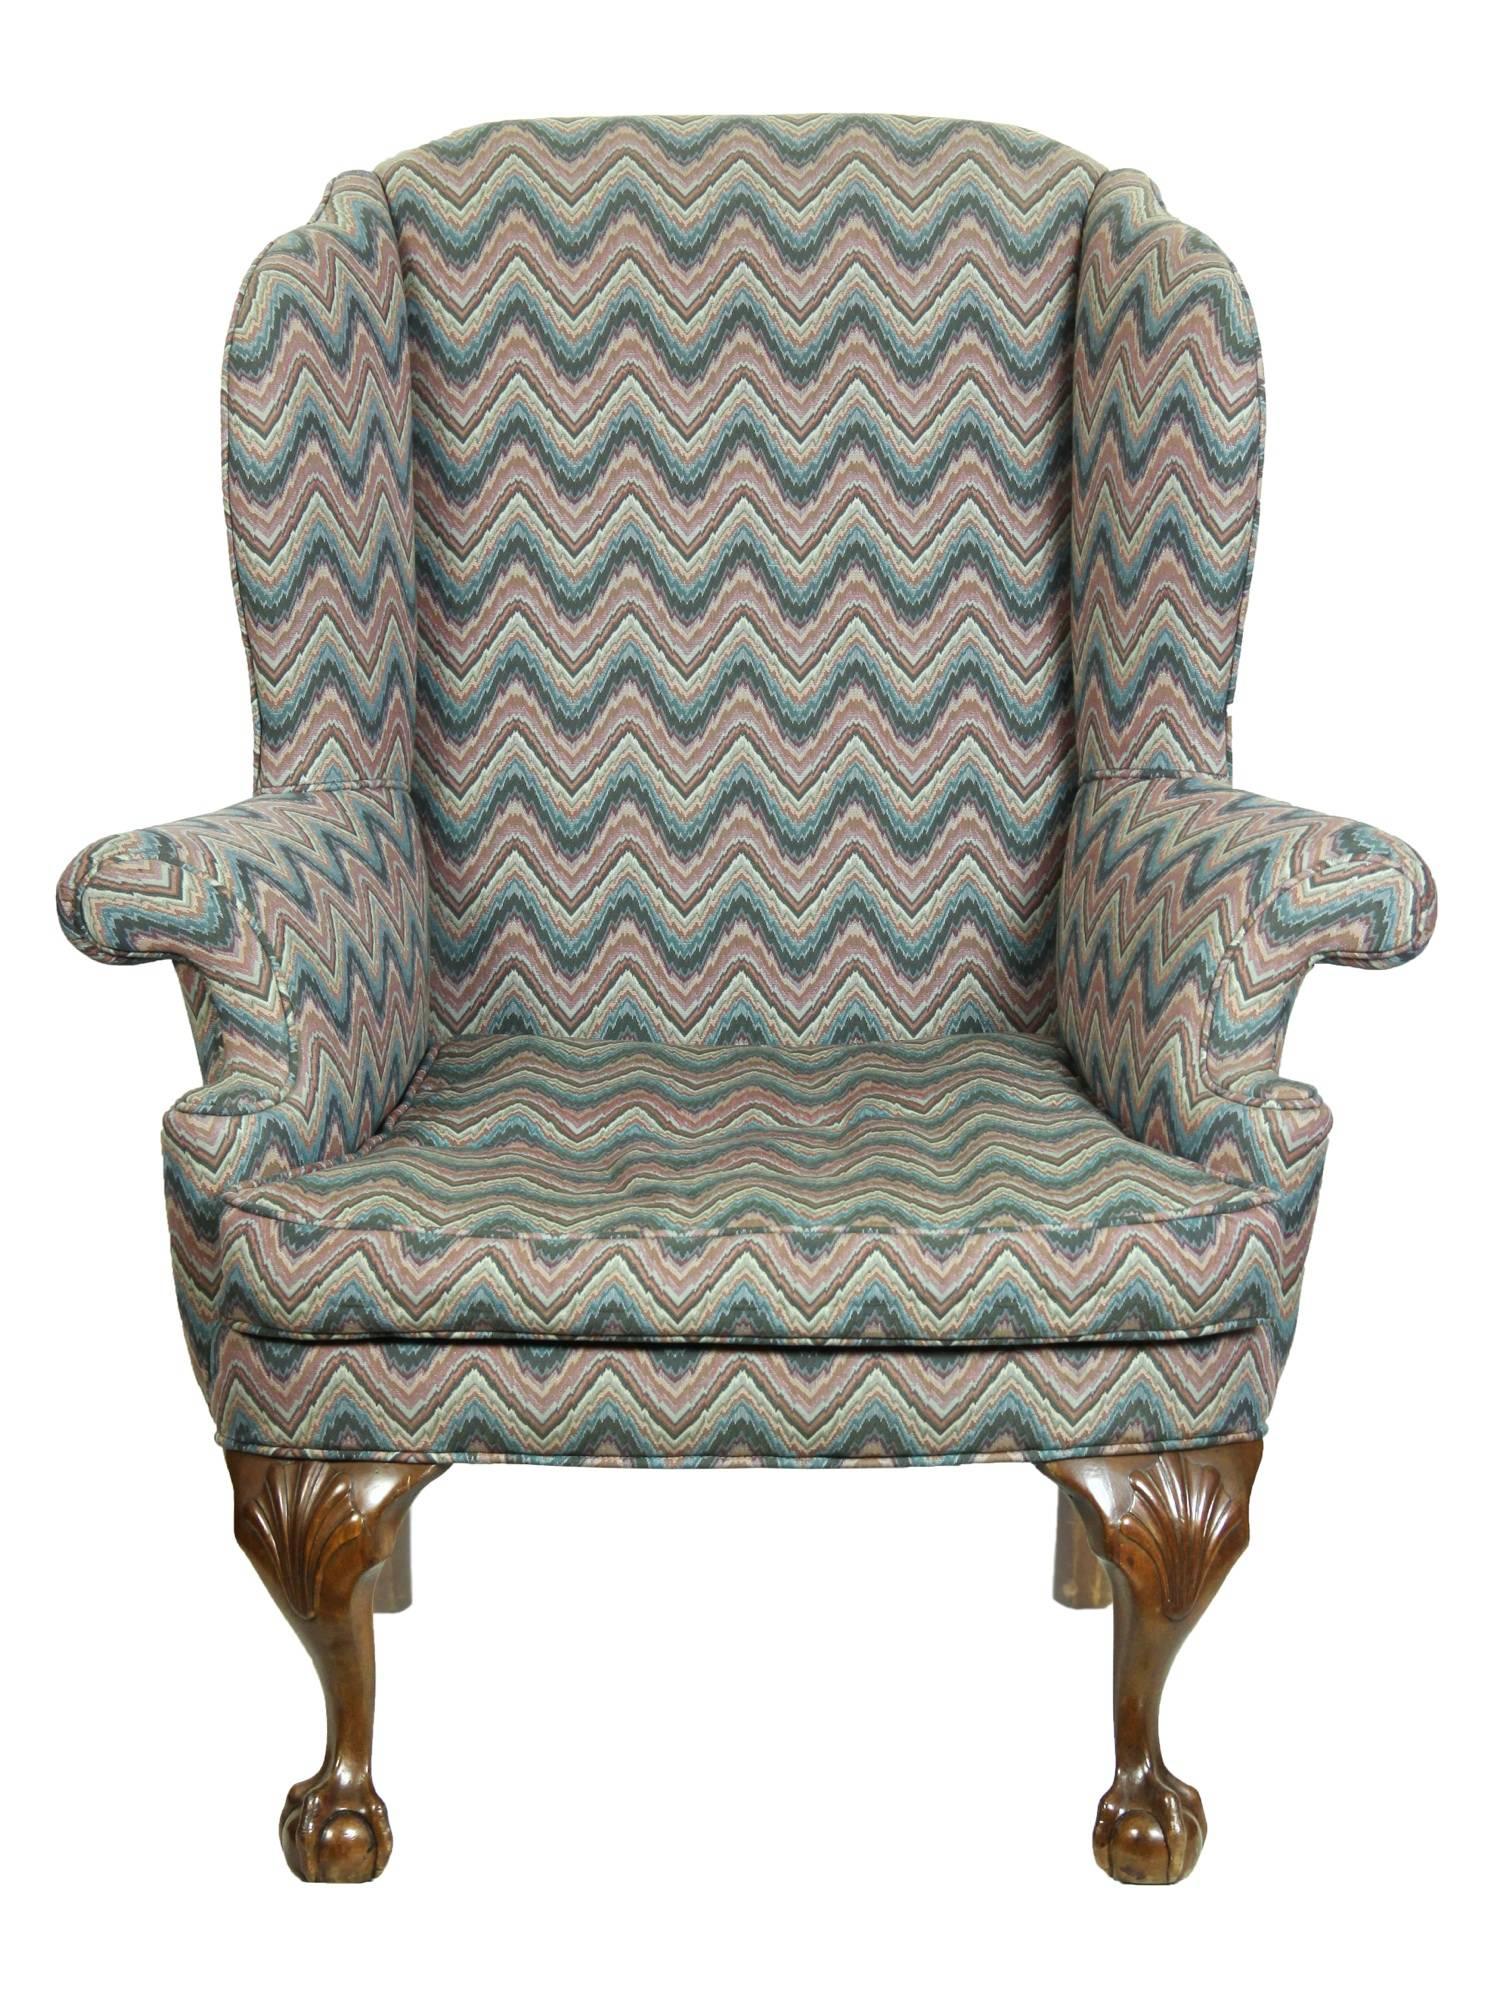 This chair, while not of the original period, is a successful reproduction of a high style original design, using handcrafted techniques, Fine figured walnut, and a heavy appropriate fabric that remains in wonderful condition, ready for use. The